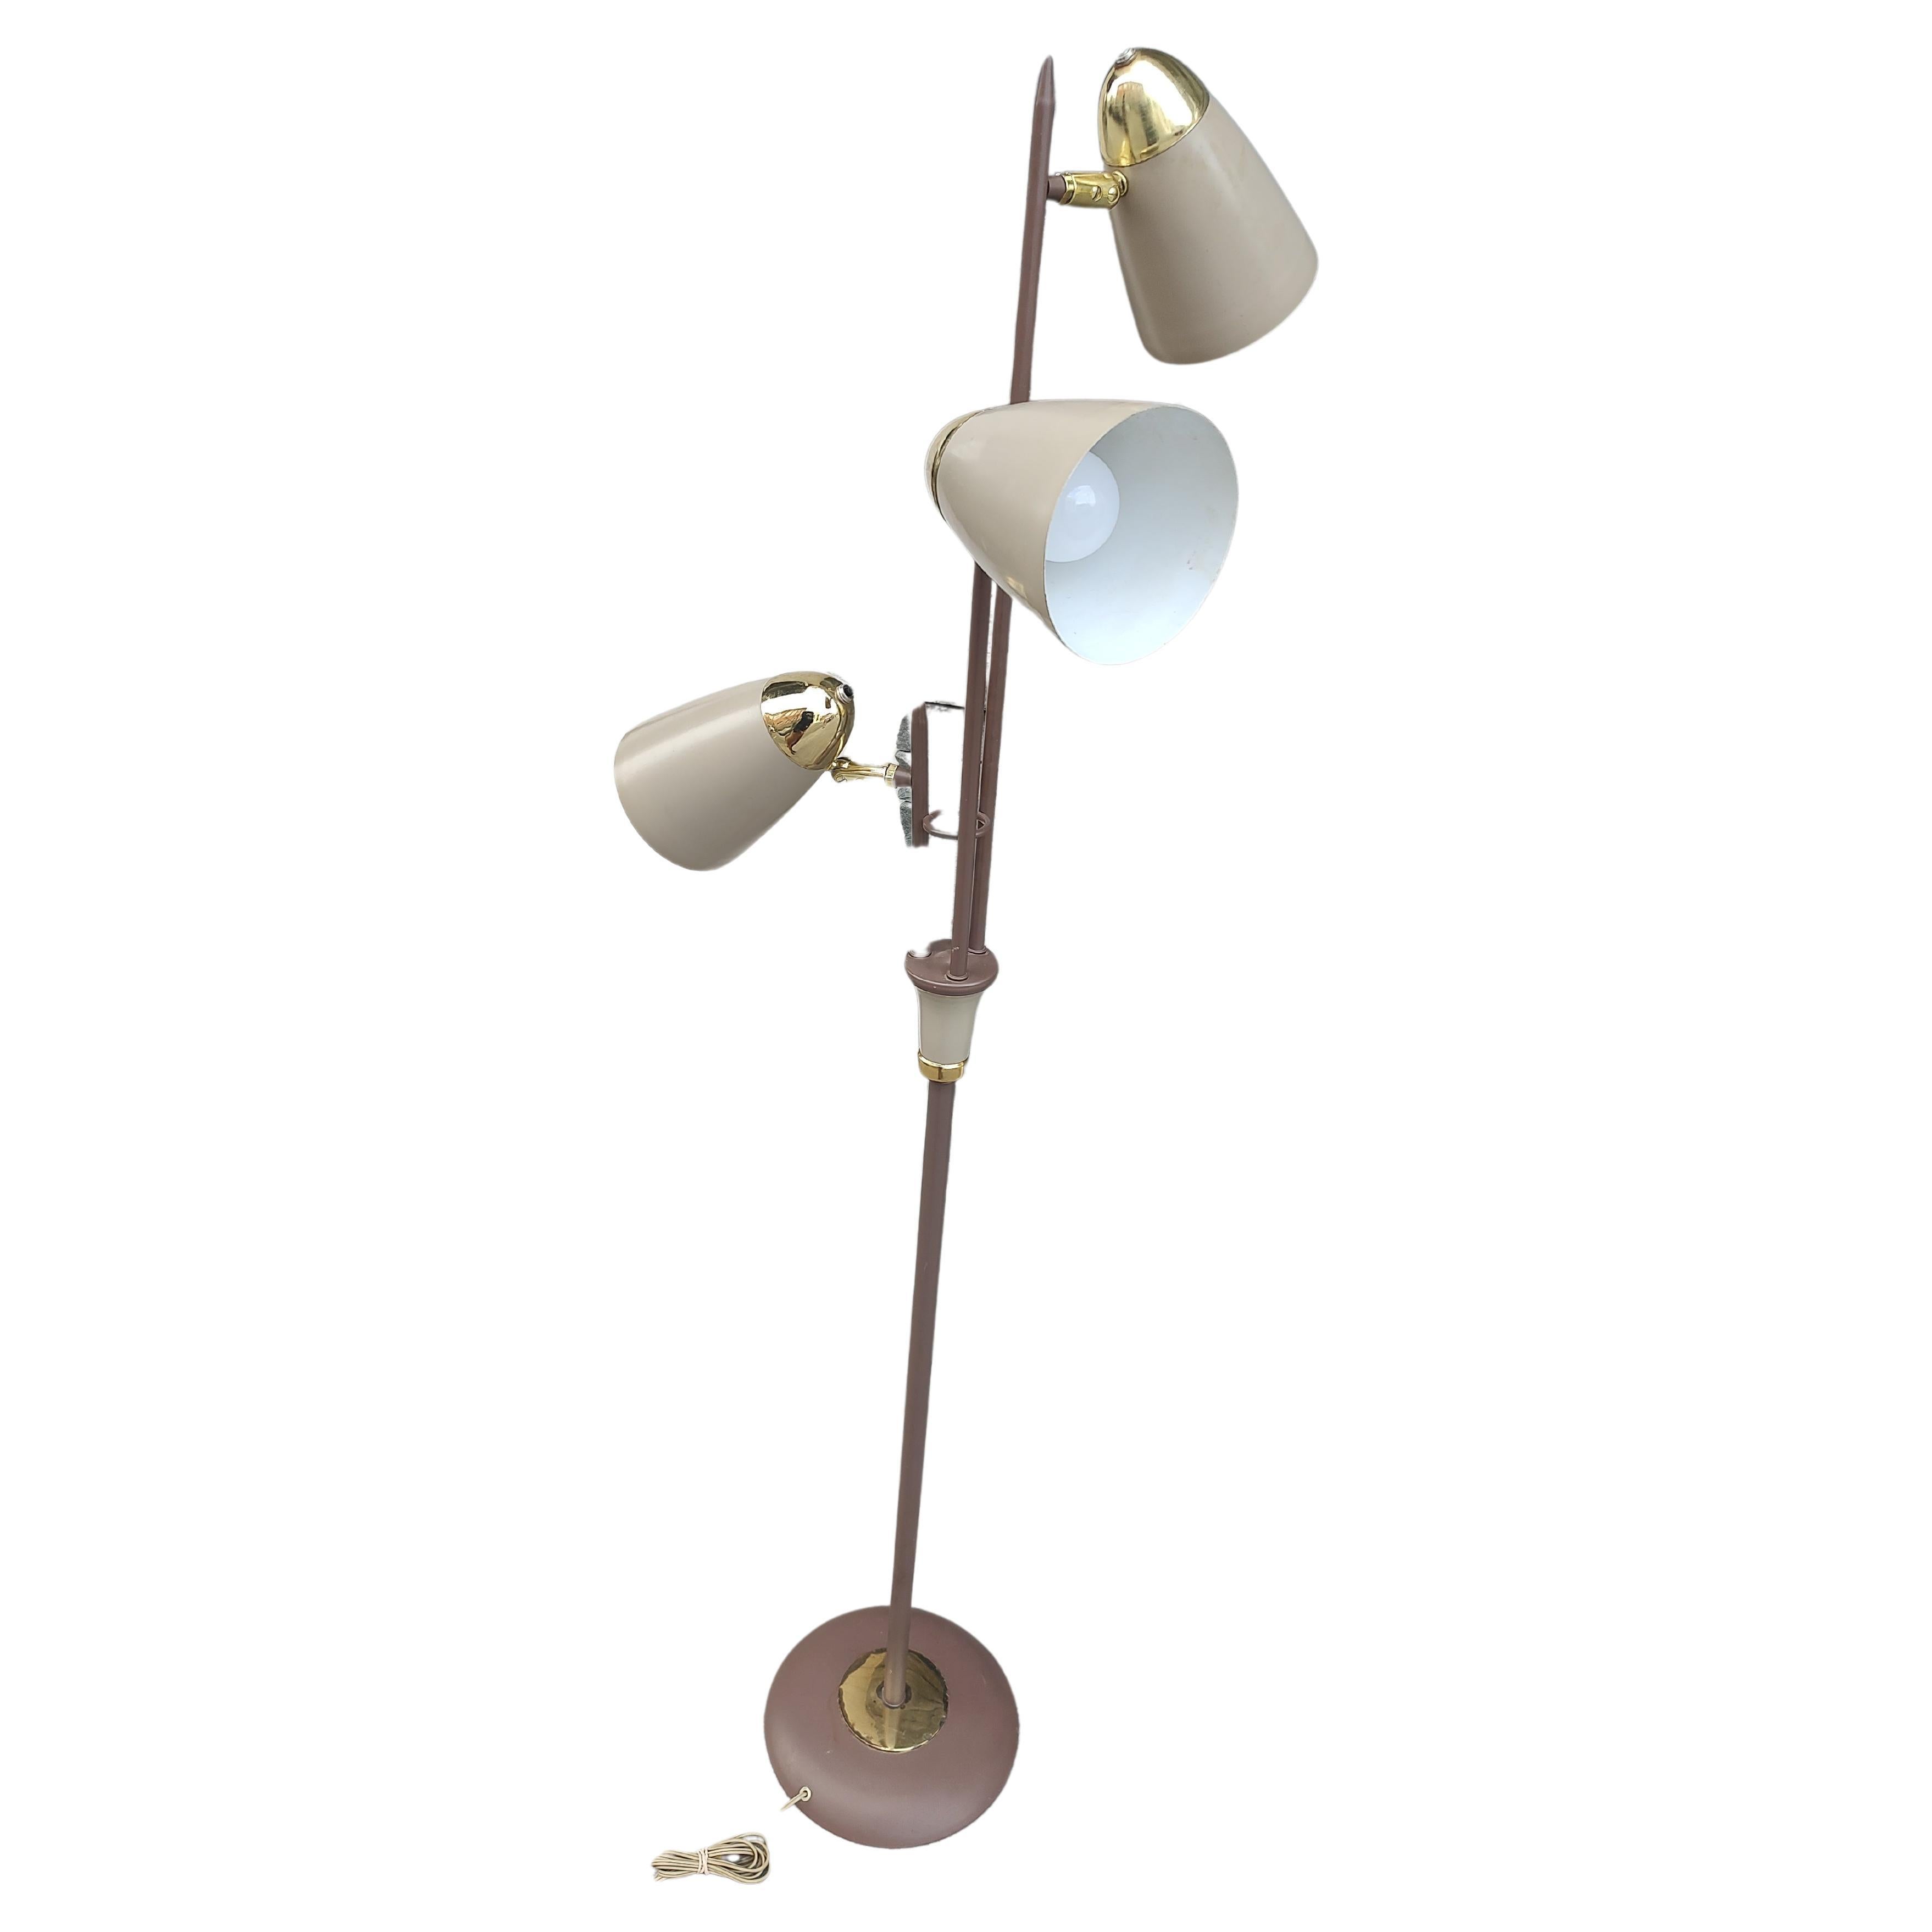 Fabulous Gerald Thurston design and interpretation of the triennial floor lamp in brown tones with brass accents. Completely maneuverable to accent any lighting position desired. In excellent vintage condition with minimal wear.